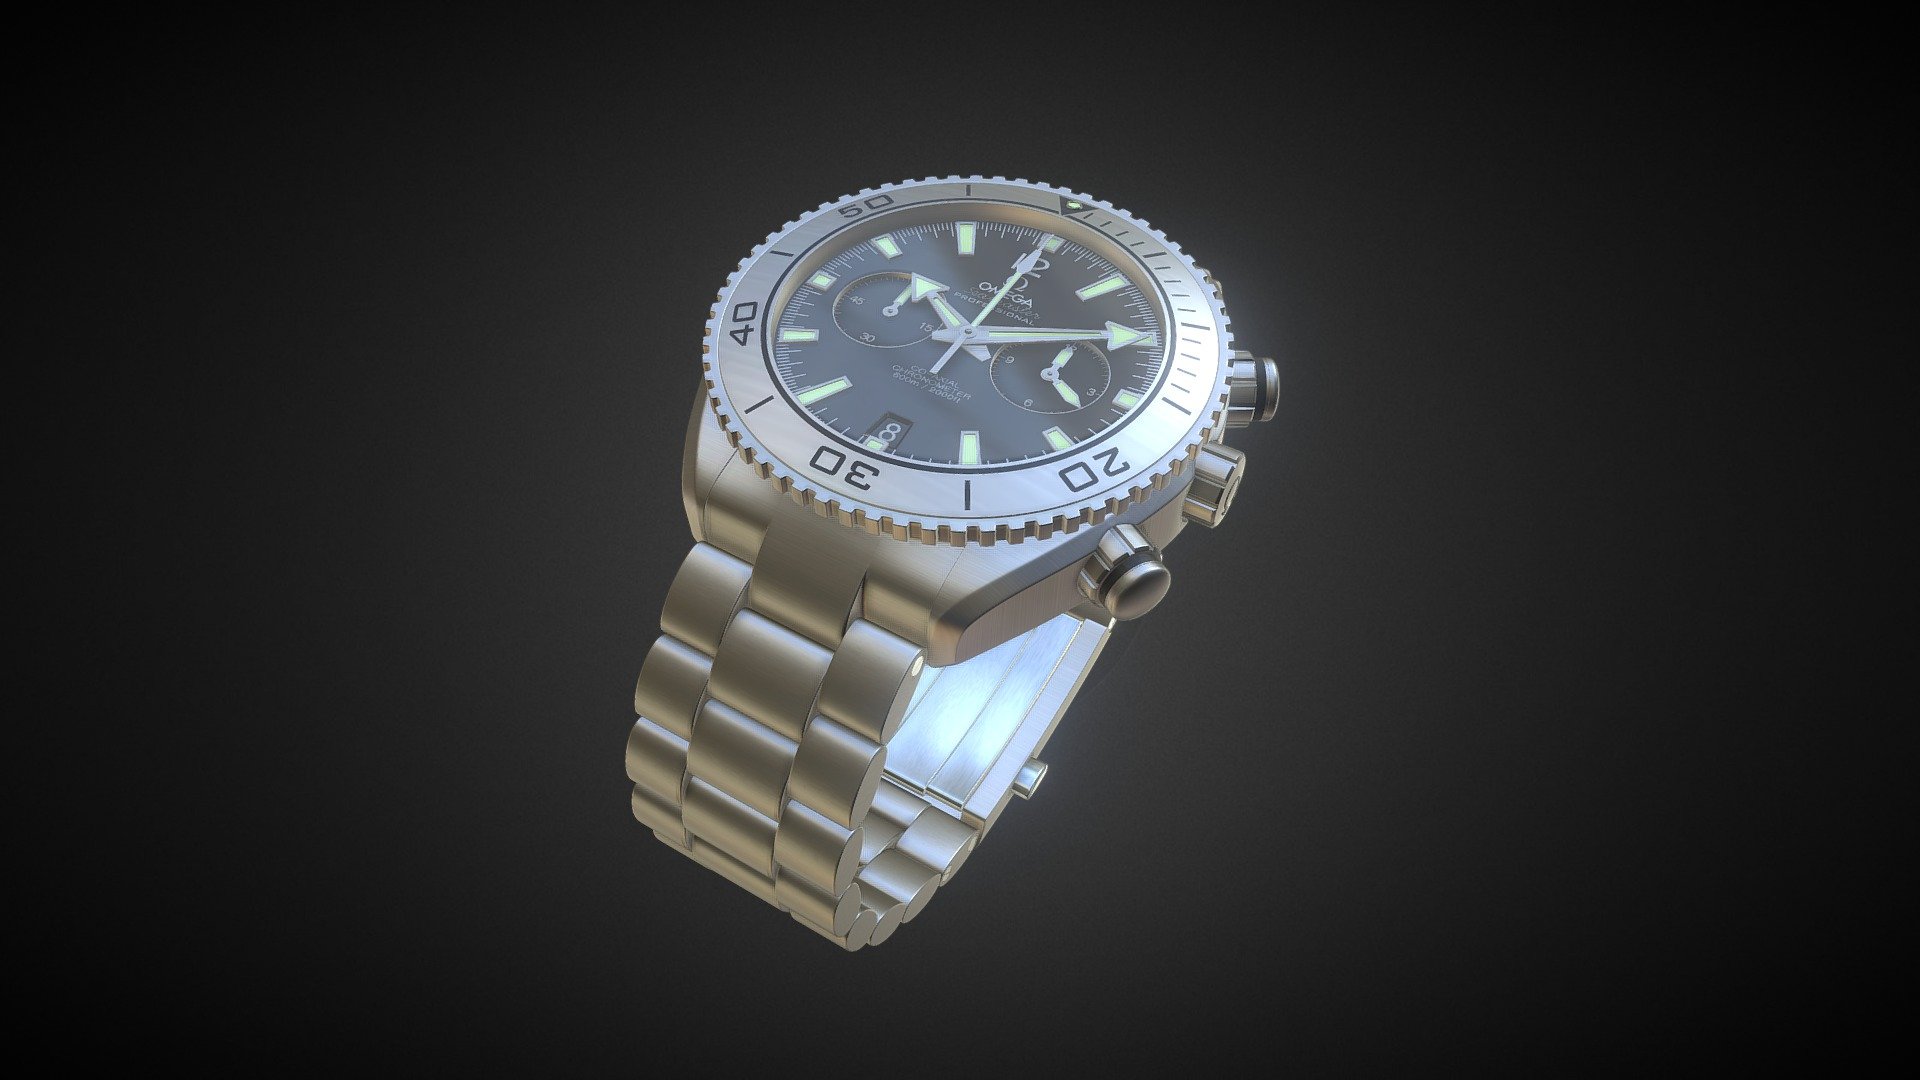 omega sea master  wrist watch modelled in 3ds max and textured in substance painter - omega watch - 3D model by melvinx 3d model